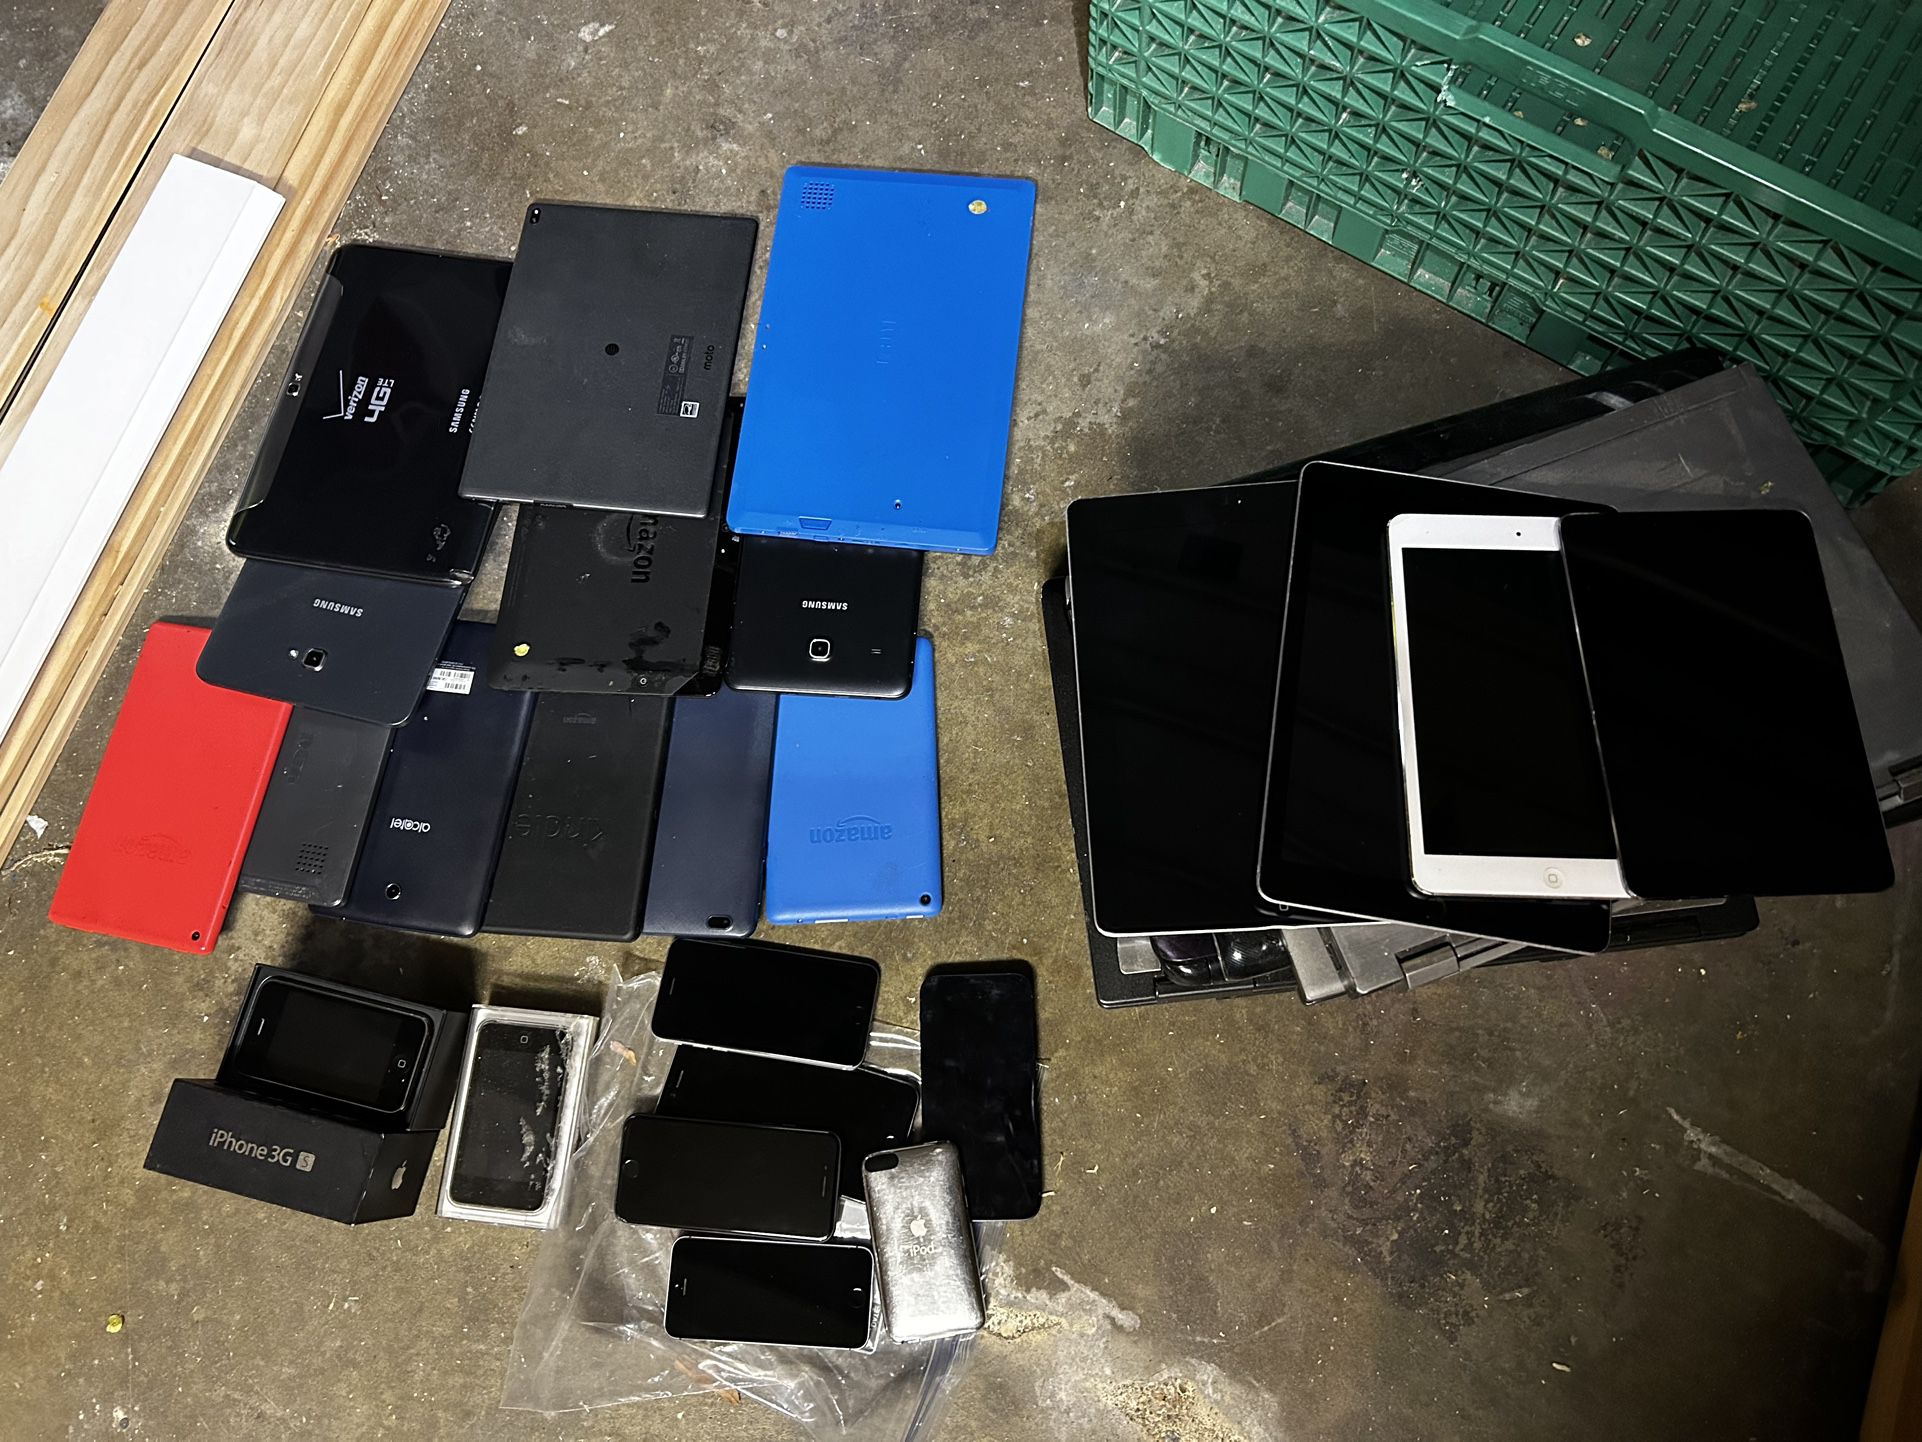 Laptops iPads iPhones iPods Tablets Lot of 31 items